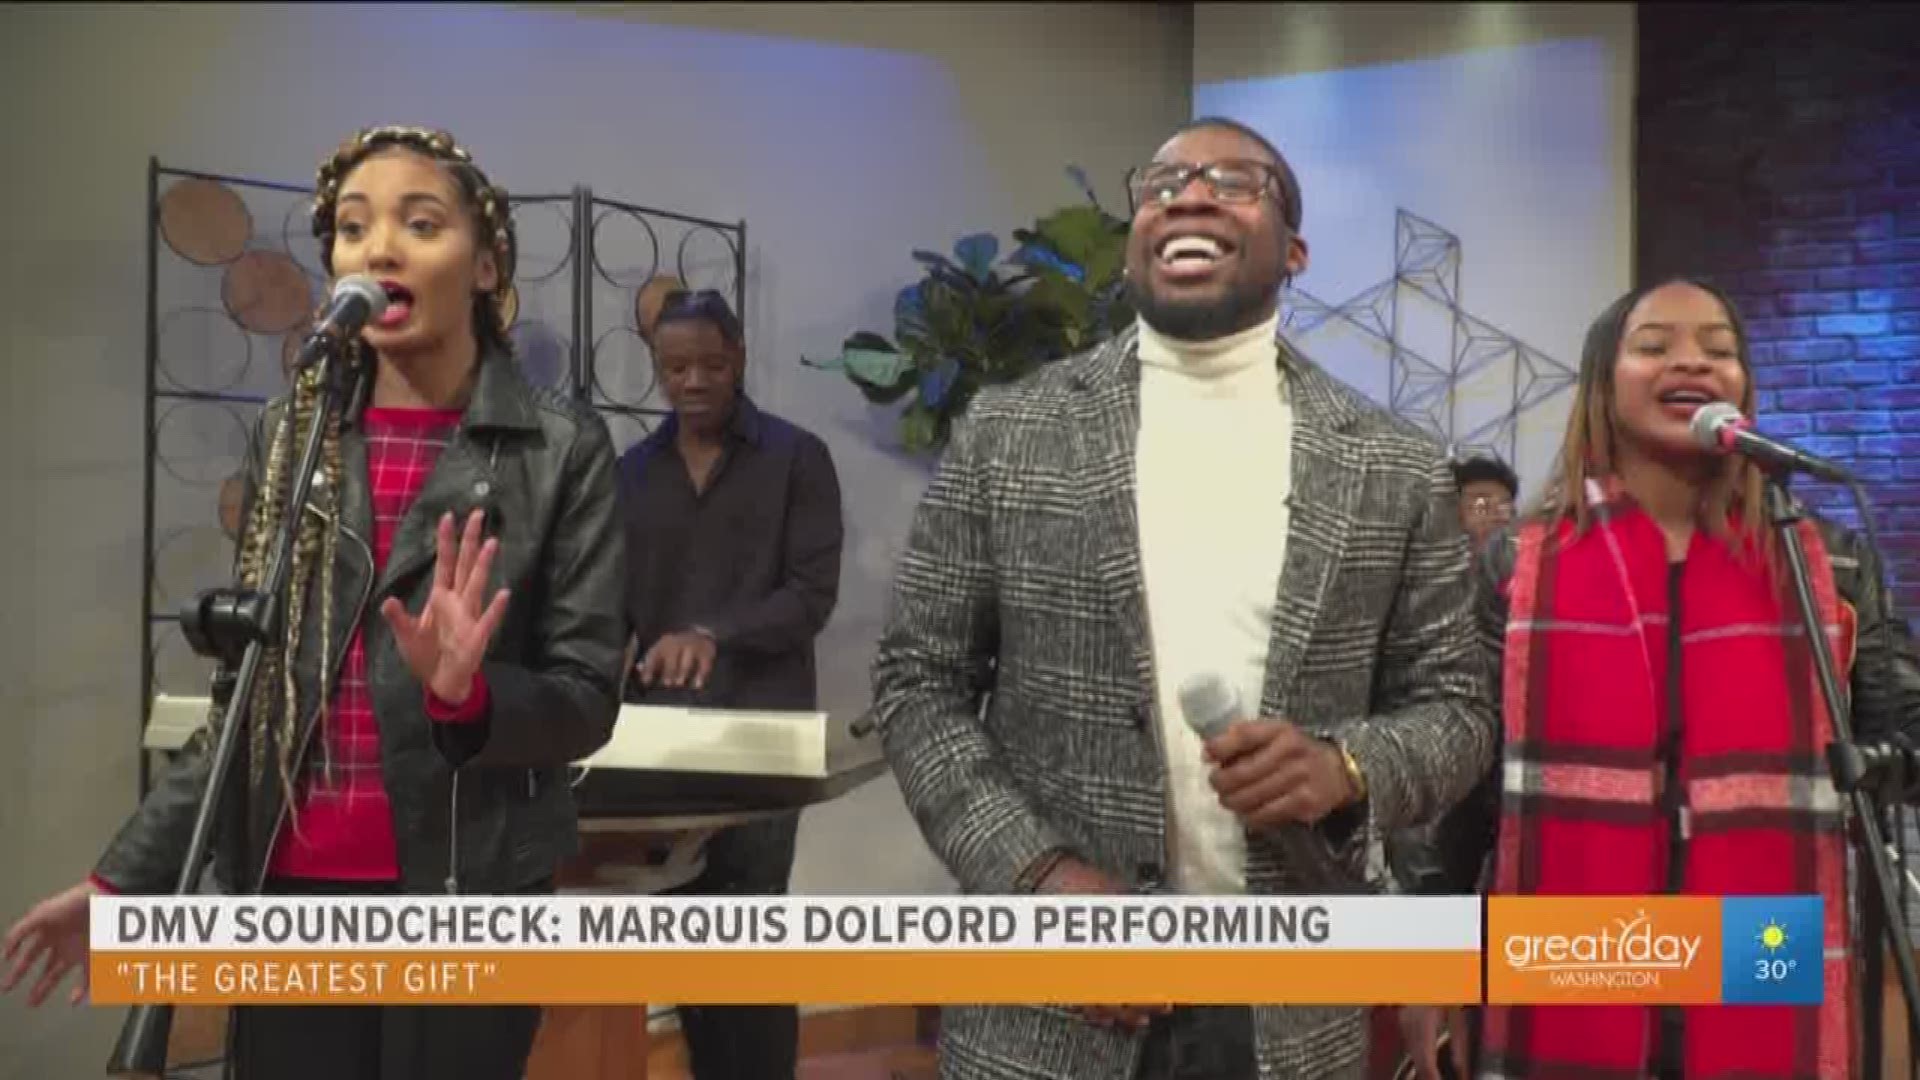 Marquis Dolford returns to the Great Day stage with a captivating performance of "The Greatest Gift". This segment was sponsored by the DC OCTFME.